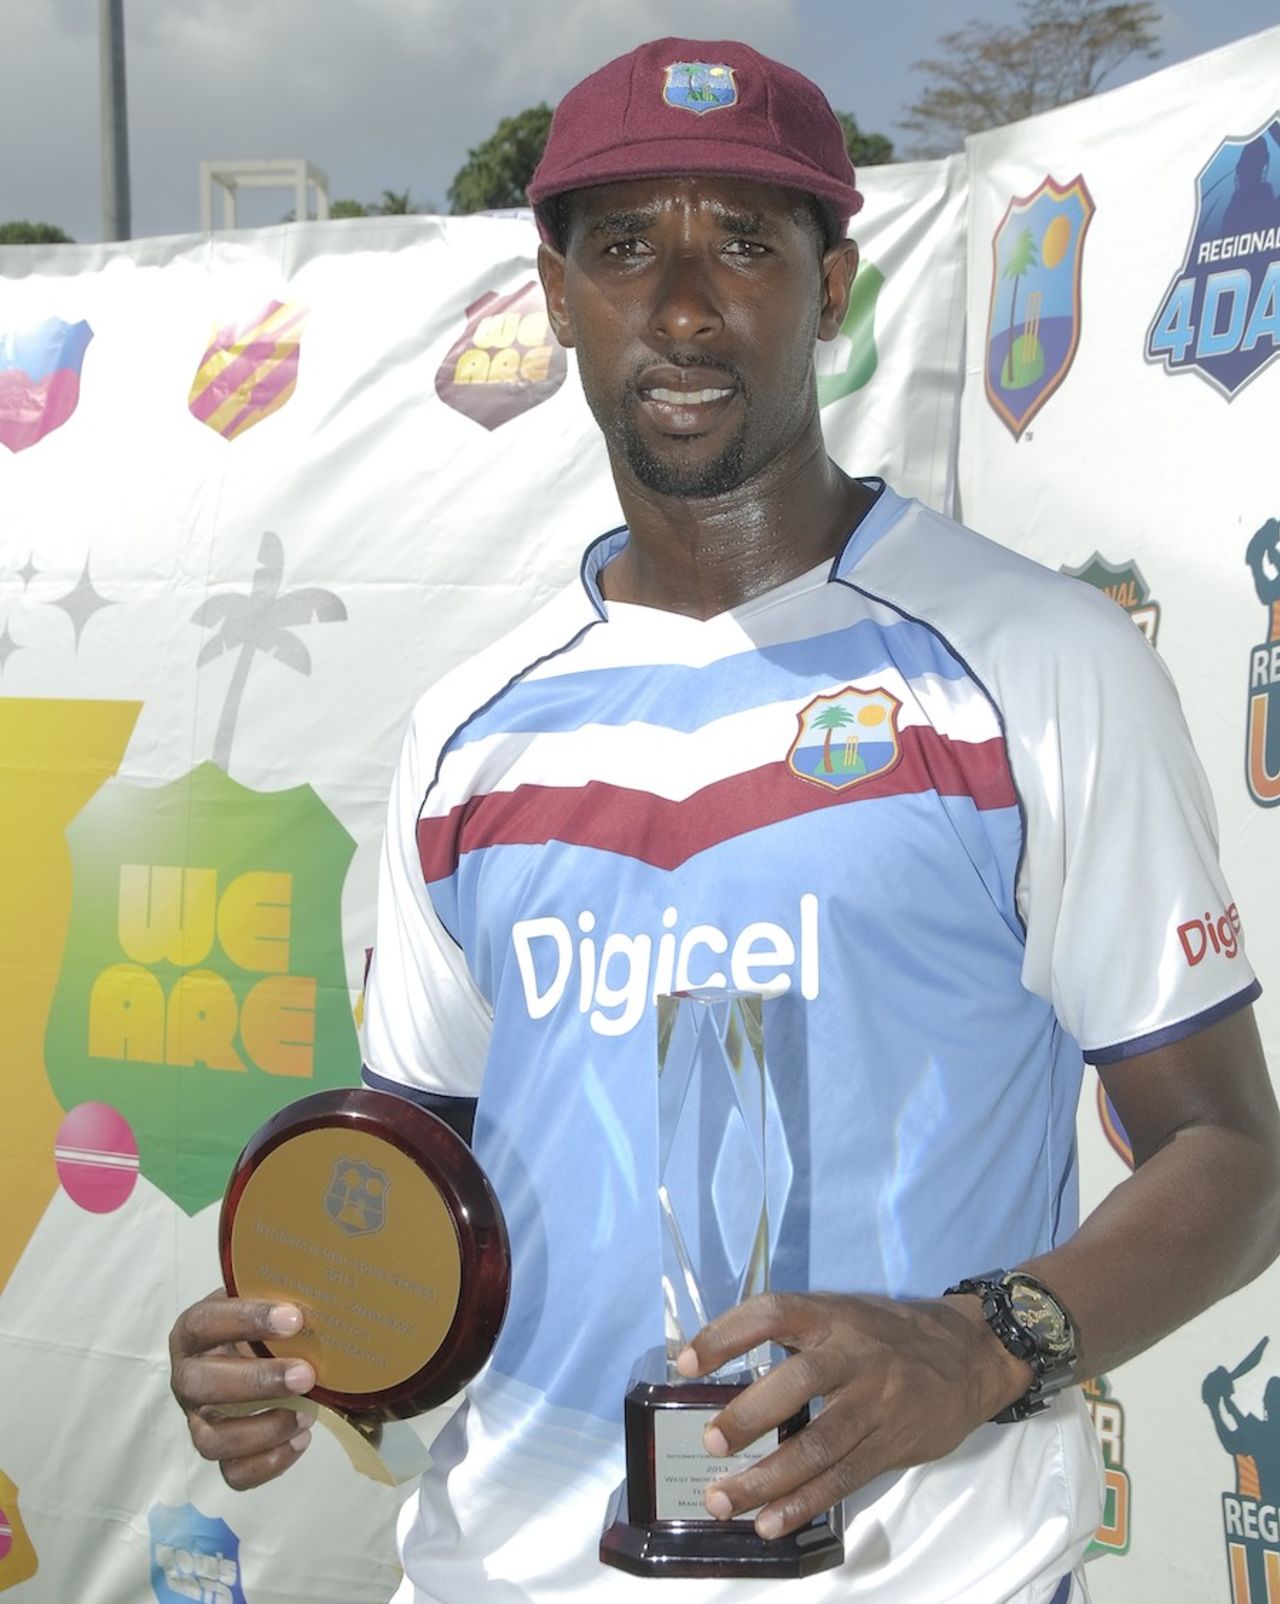 Shane Shillingford was the Man of the Match and Series, West Indies v Zimbabwe, 2nd Test, Dominica, 3rd day, March 22, 2013